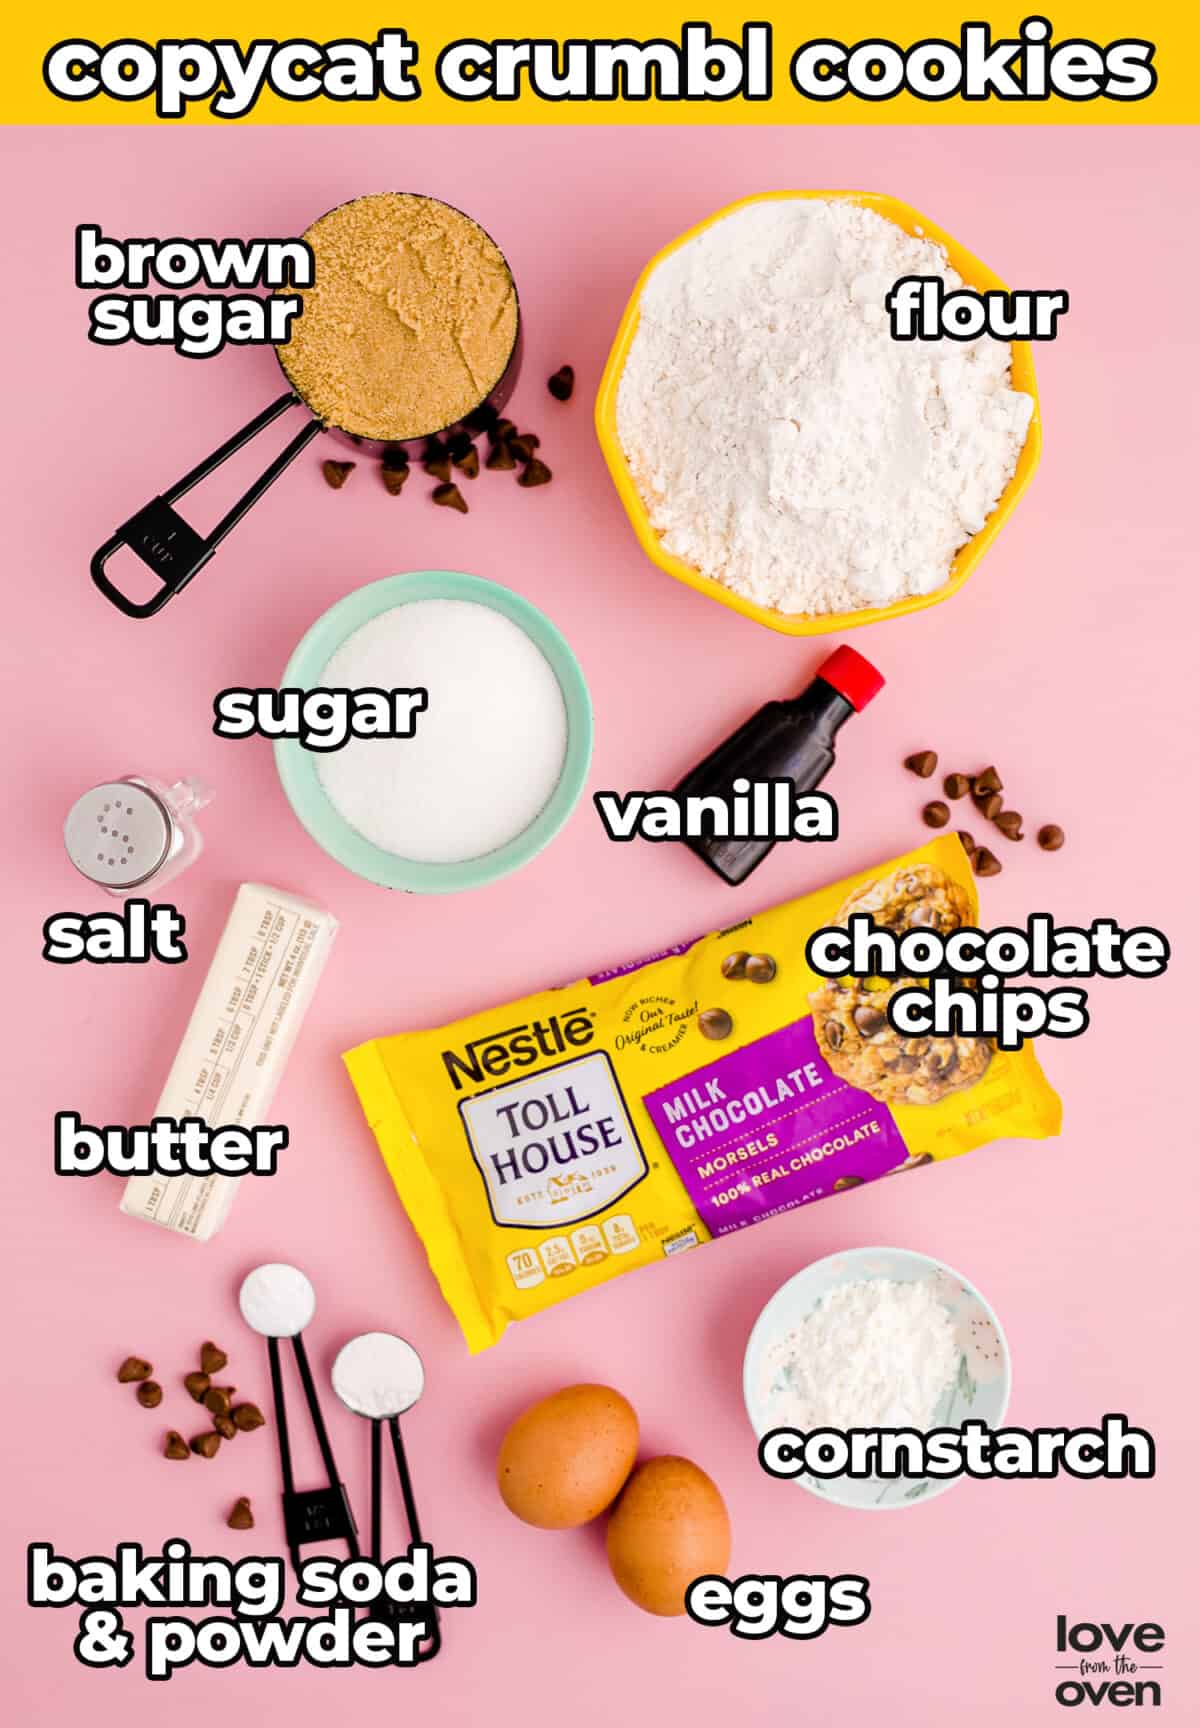 The ingredients to make crumbl cookies